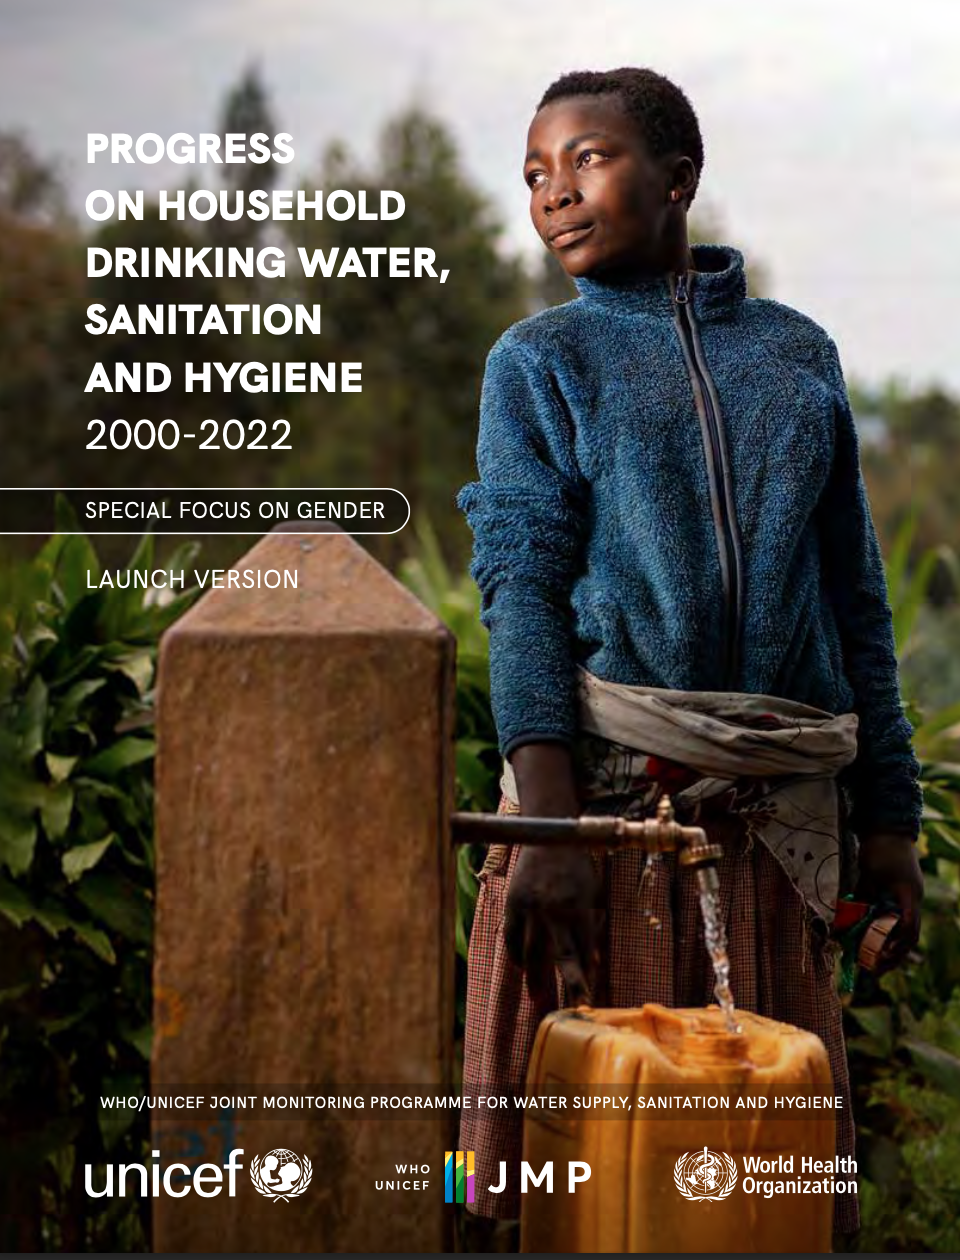 Progress on household drinking water, sanitation and hygiene 2000-2022: Special focus on gender (UNICEF)